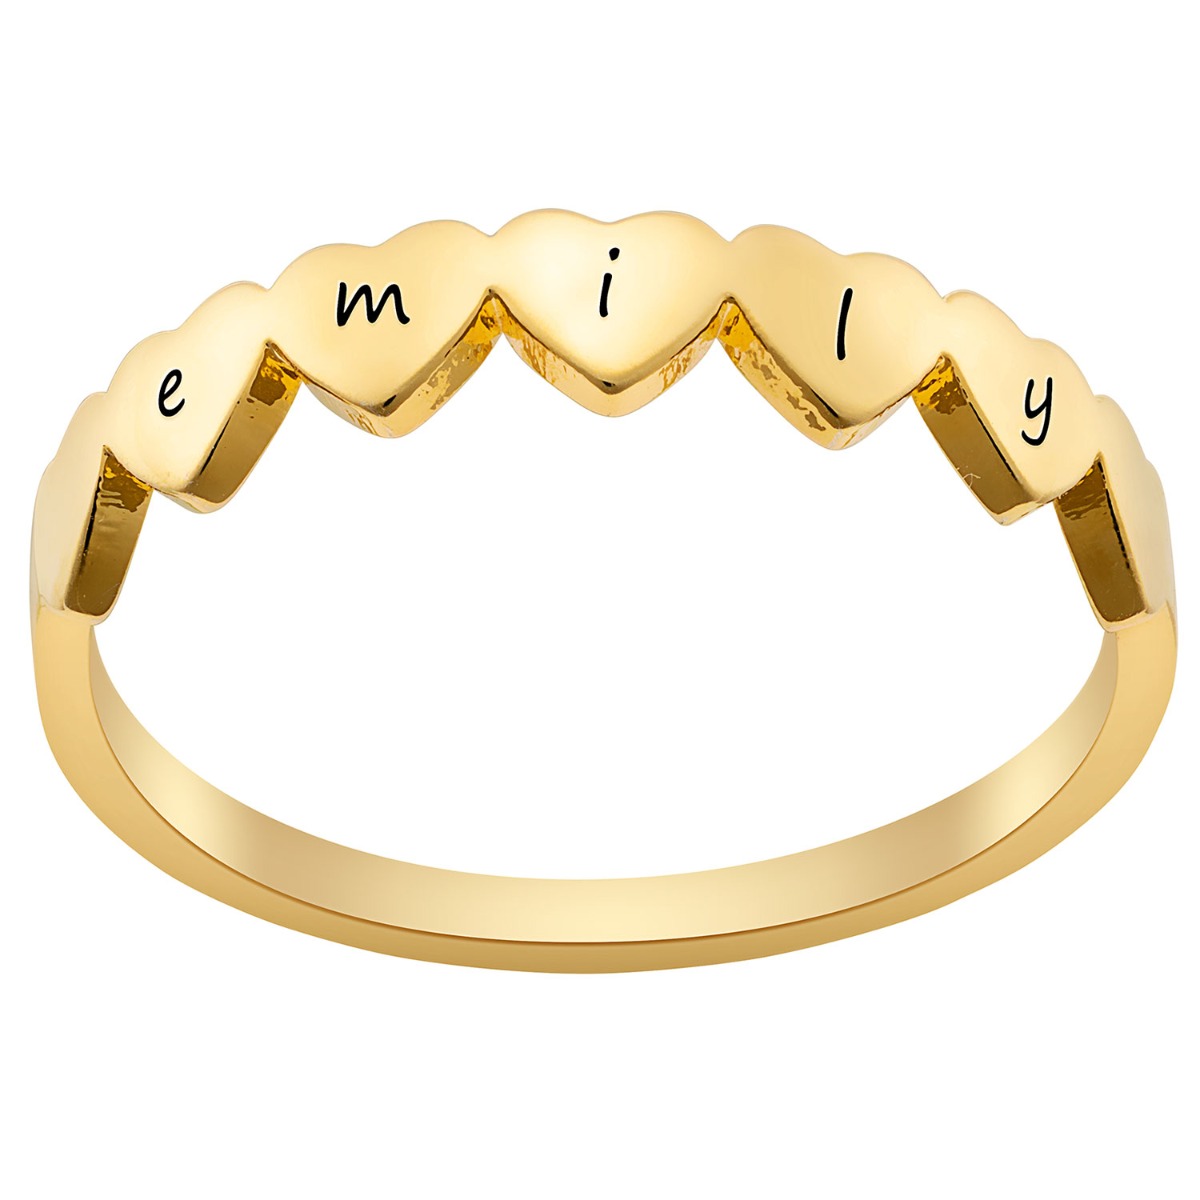 Row of Hearts 14K Gold Plated Name Ring